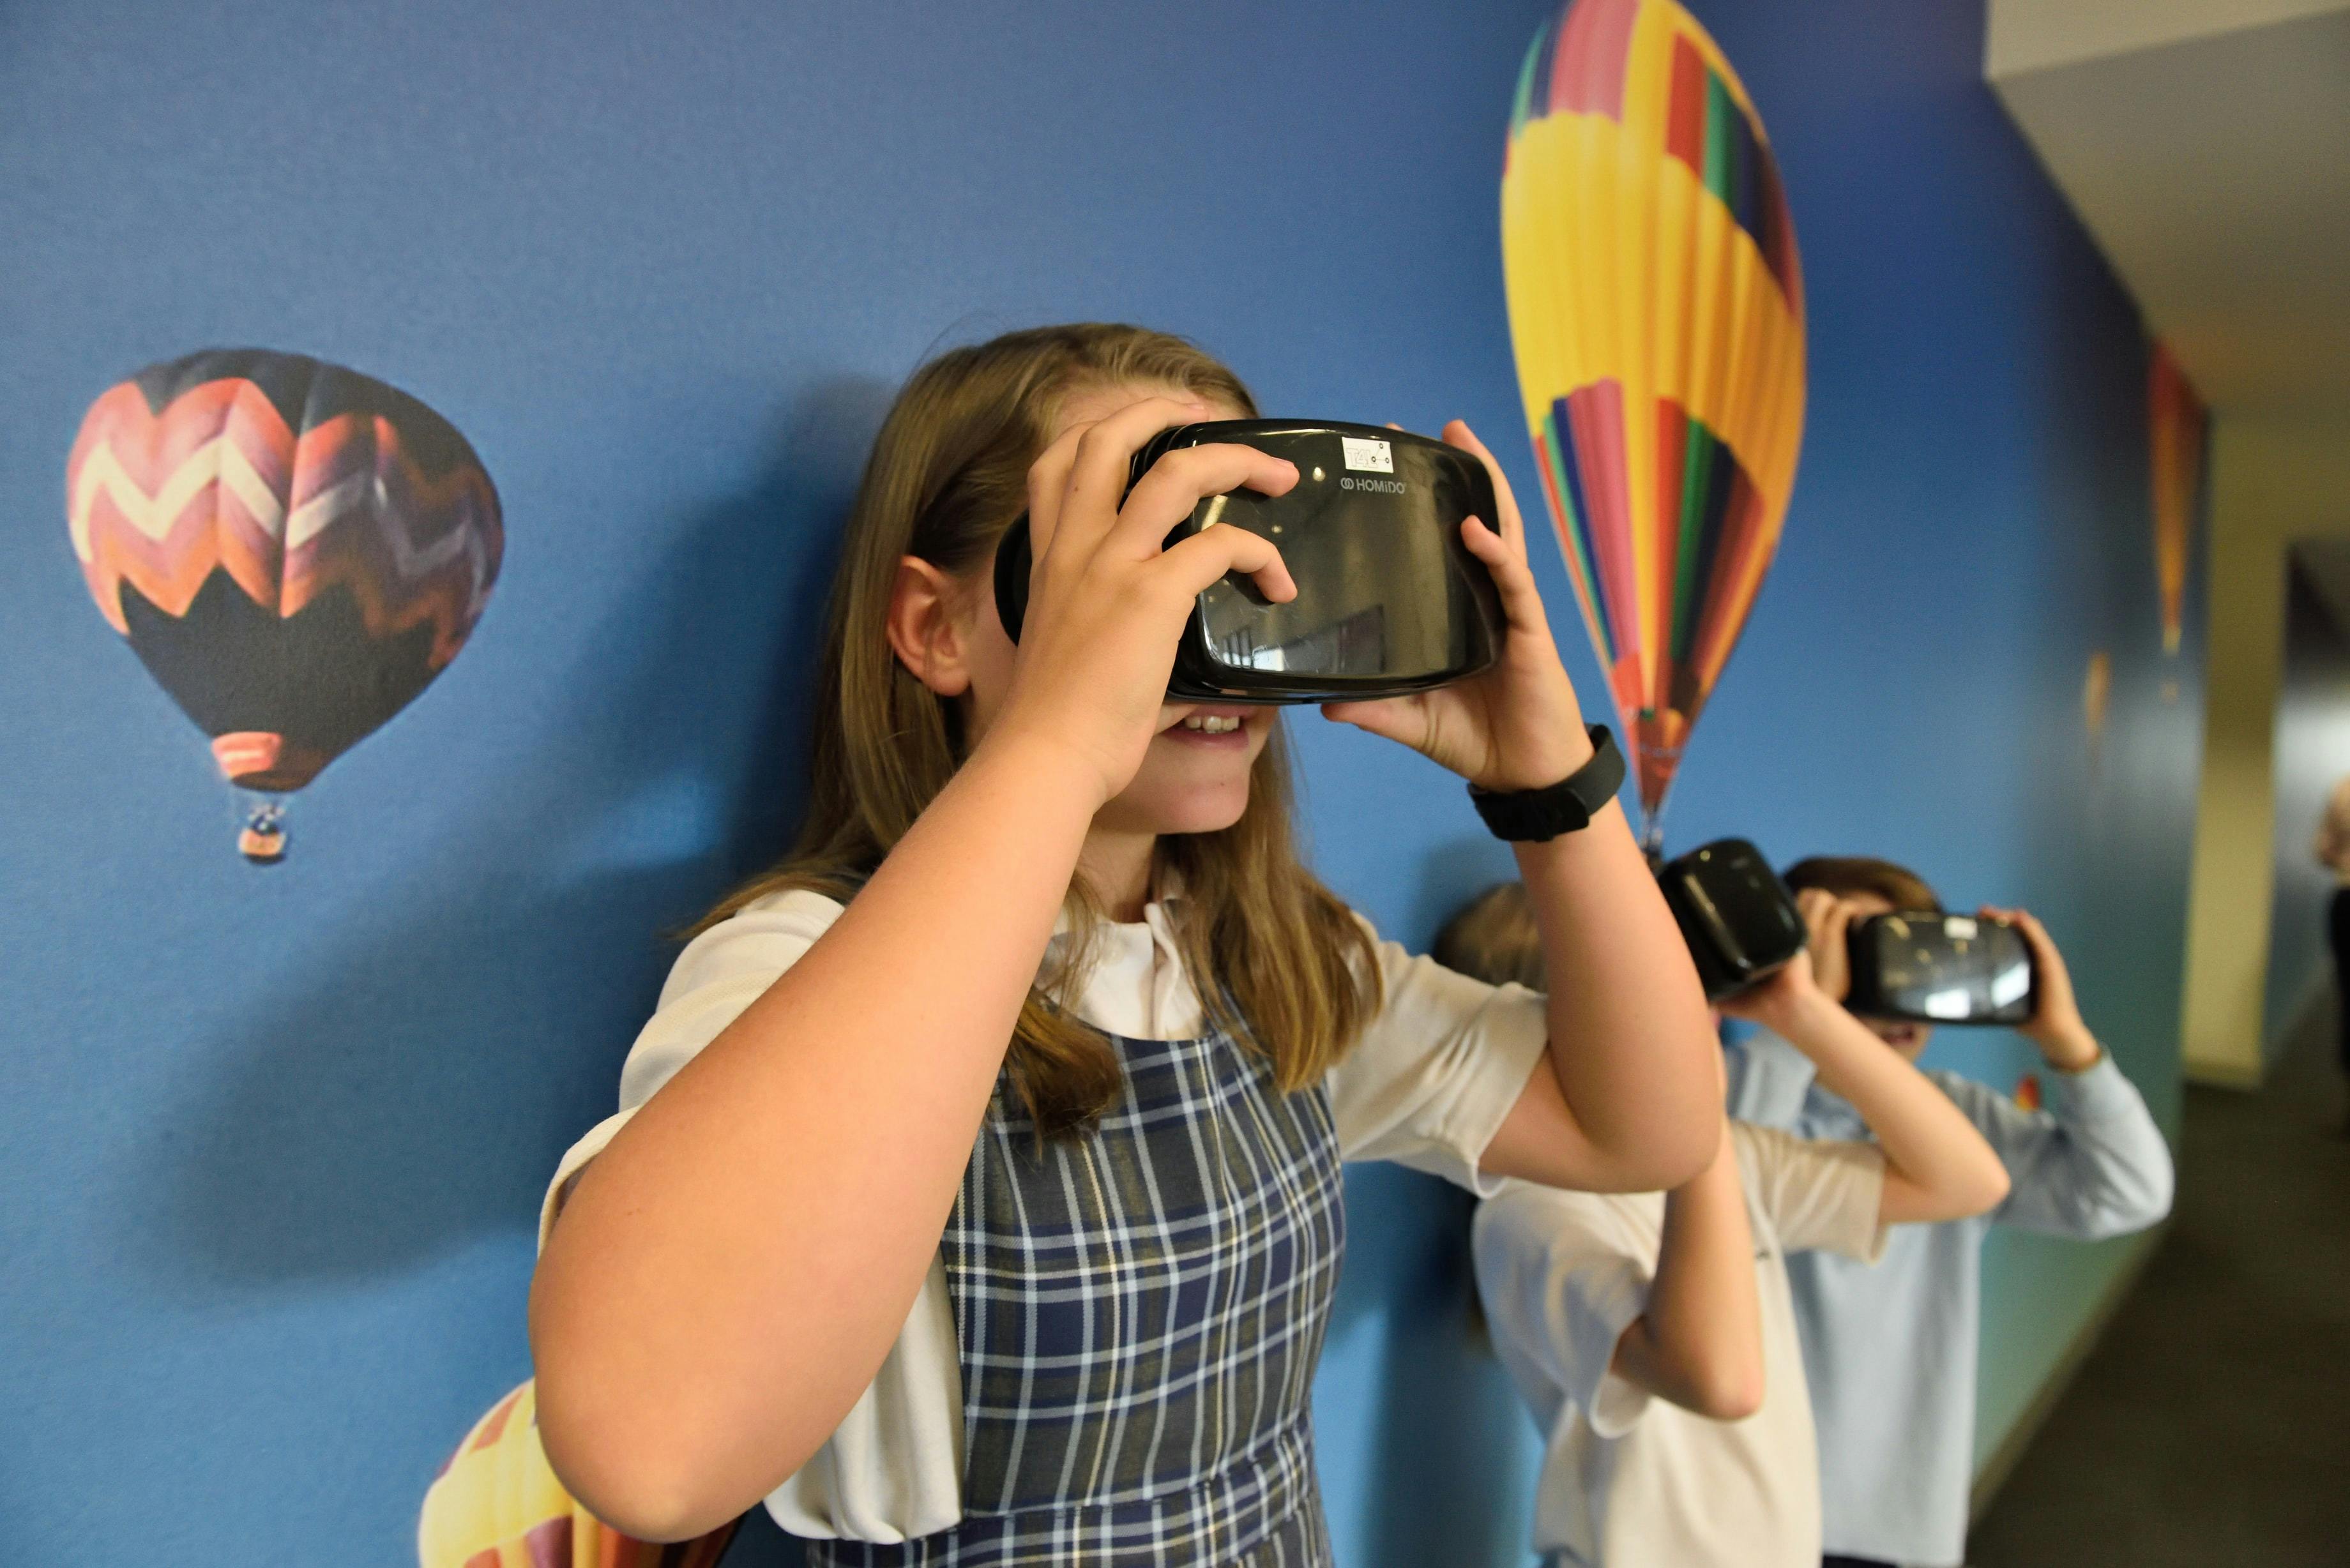 Three students use virtual reality headsets as part of a type of game-based learning activity.